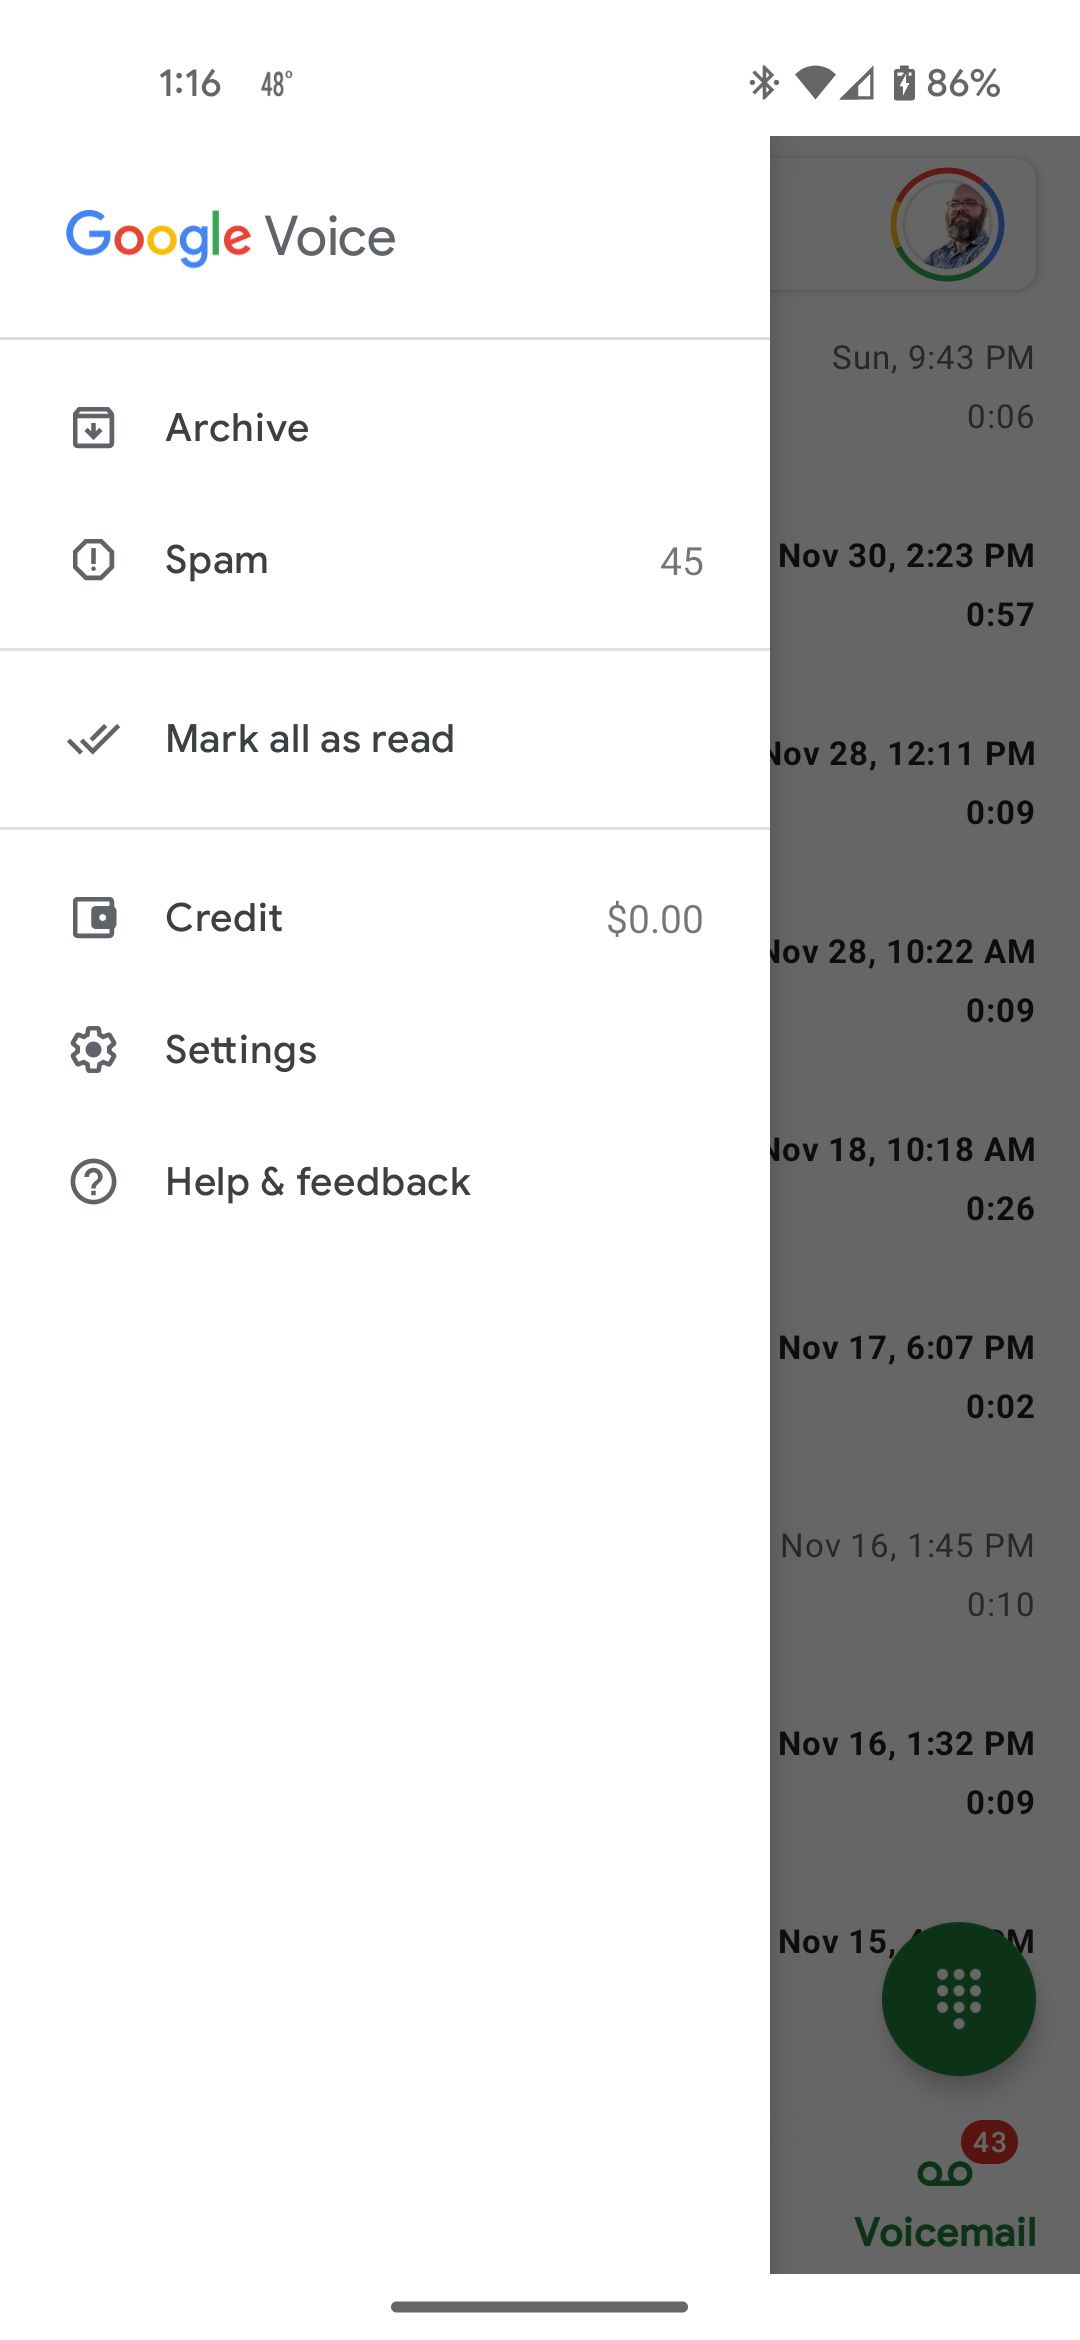 Accessing settings on Google Voice